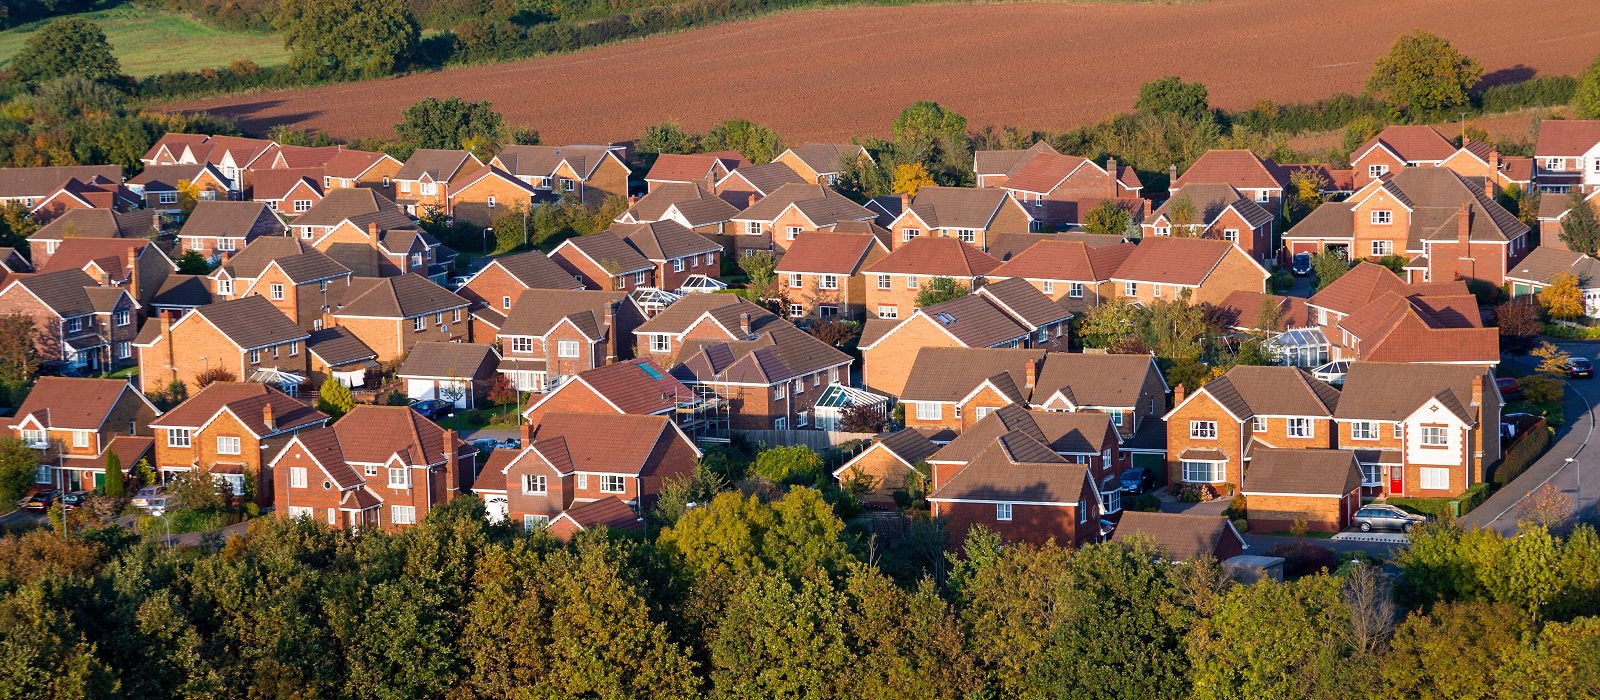 Modern, red brick houses viewed from above.